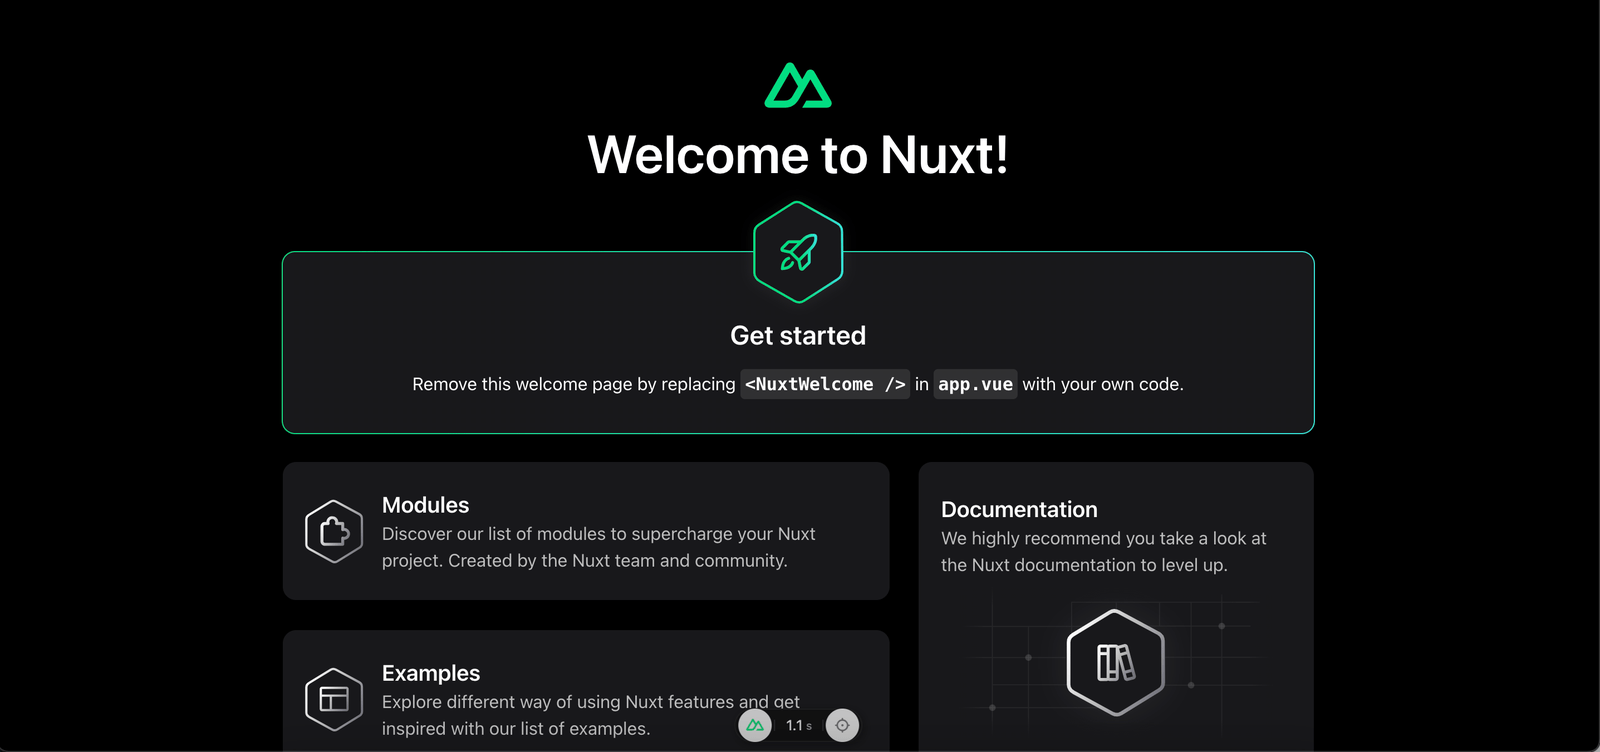 welcome to Nuxt landing page